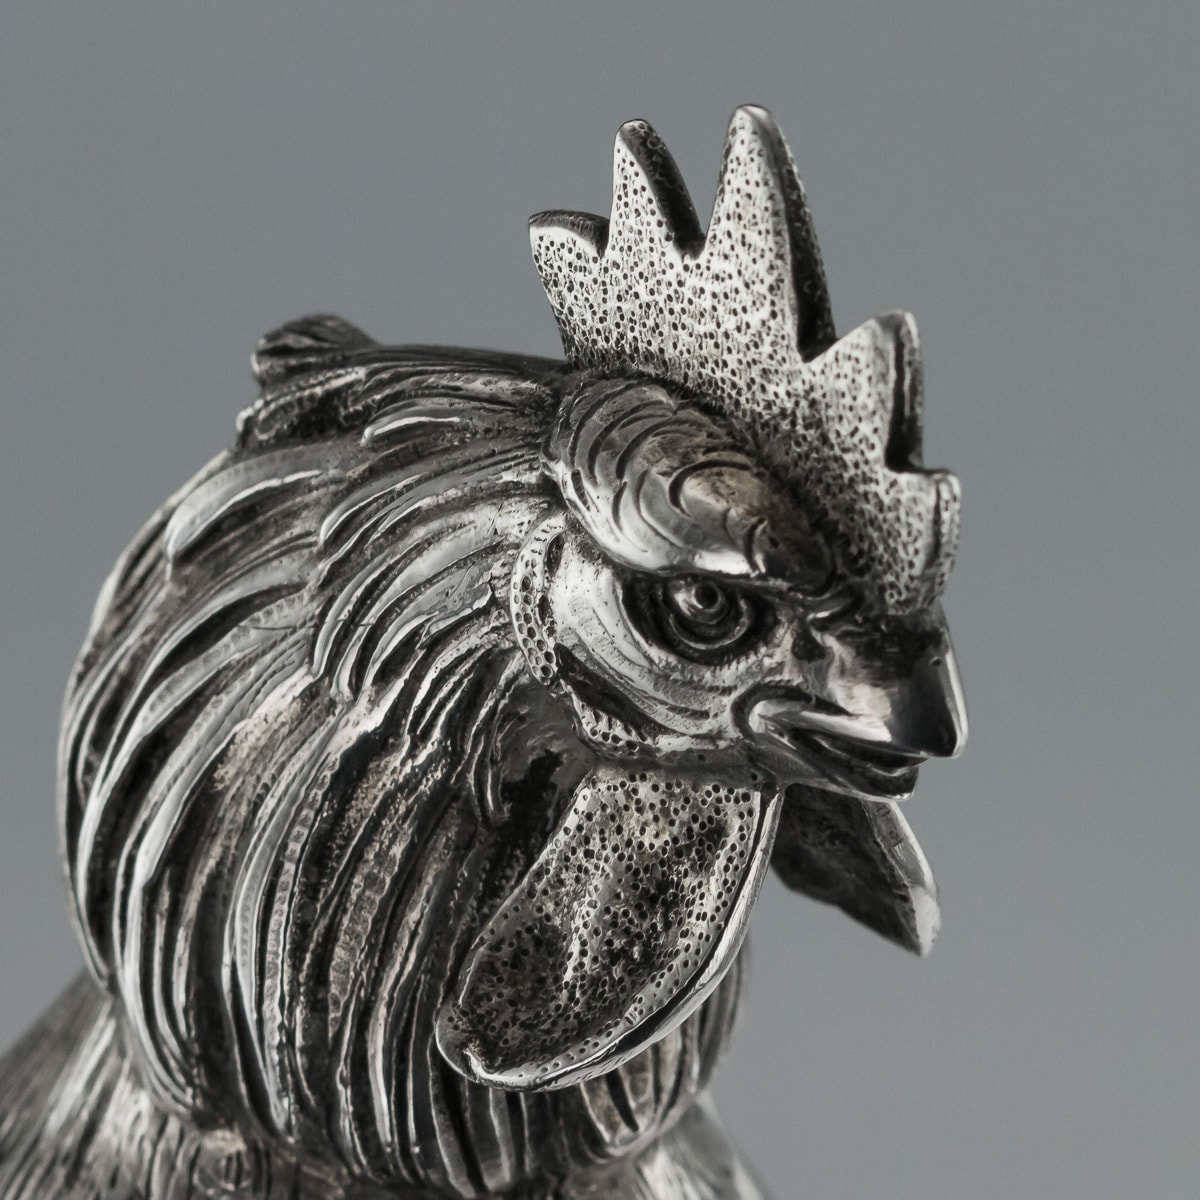 A PAIR OF GERMAN SILVER TABLE ORNAMENTS MODELLED AS FIGHTING COCKERELS - Image 5 of 41